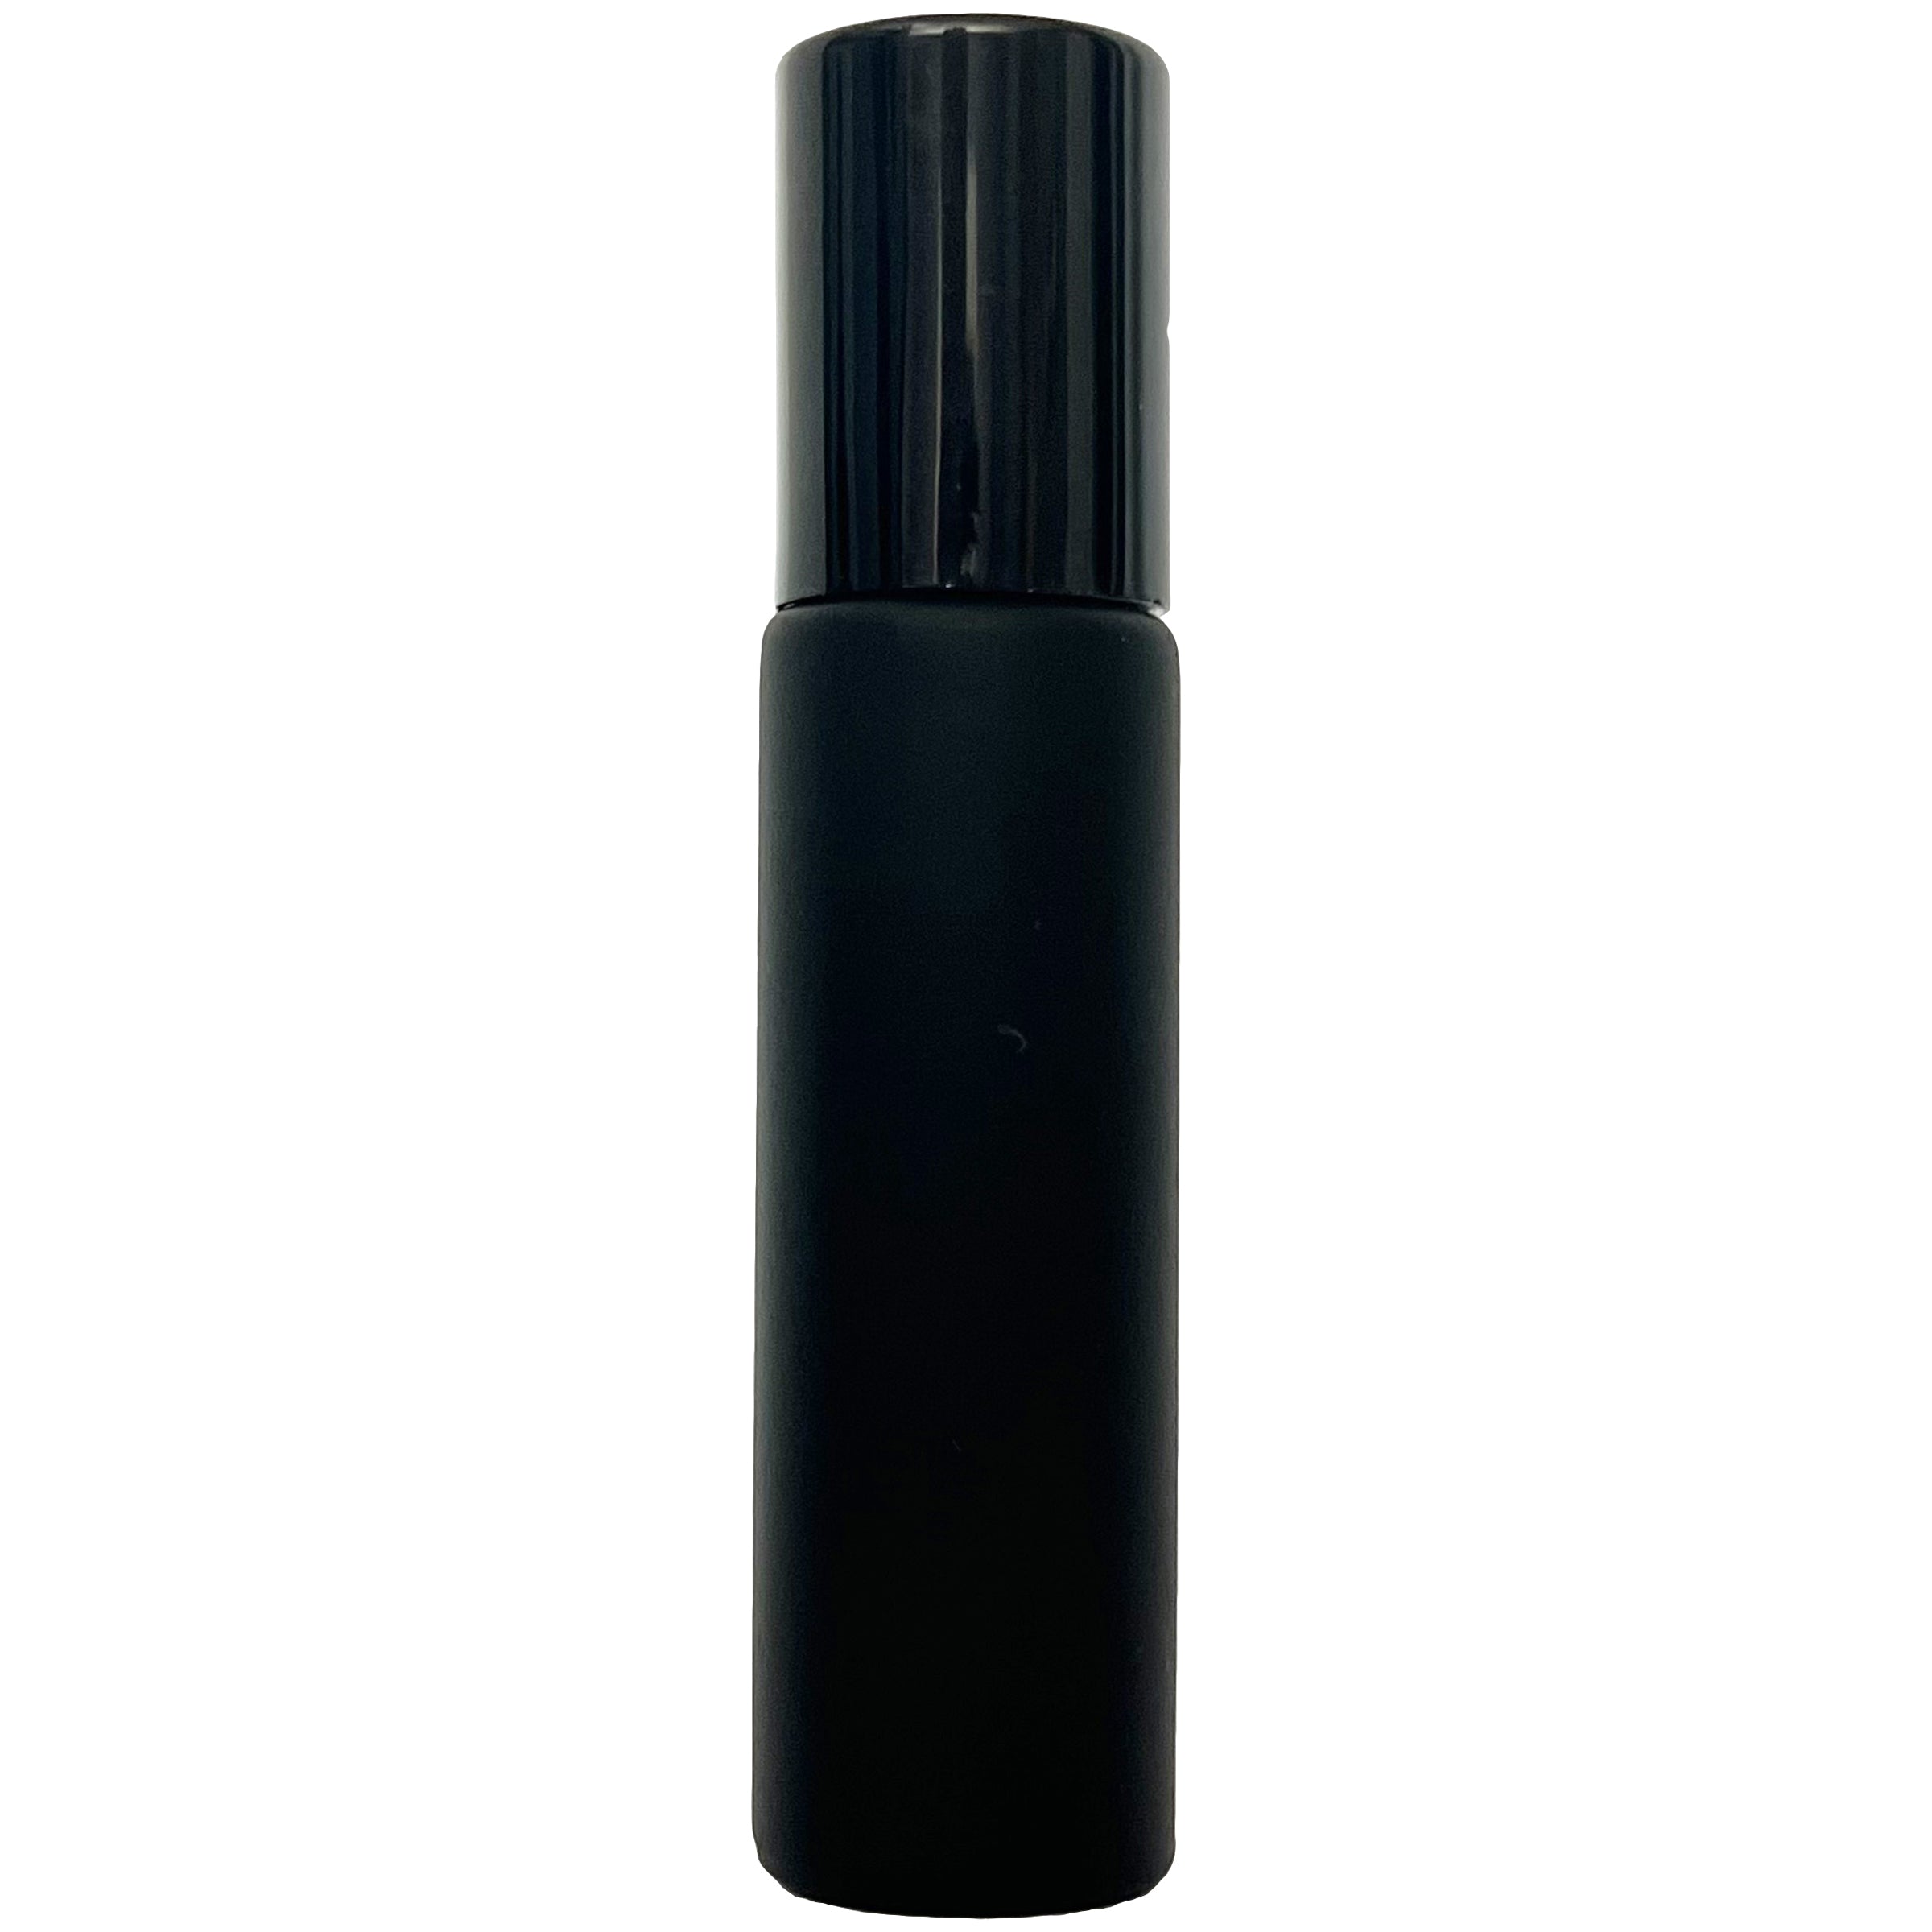 10ml 0.33oz Frosted Black Thick Glass Roll On Roller Ball Bottles